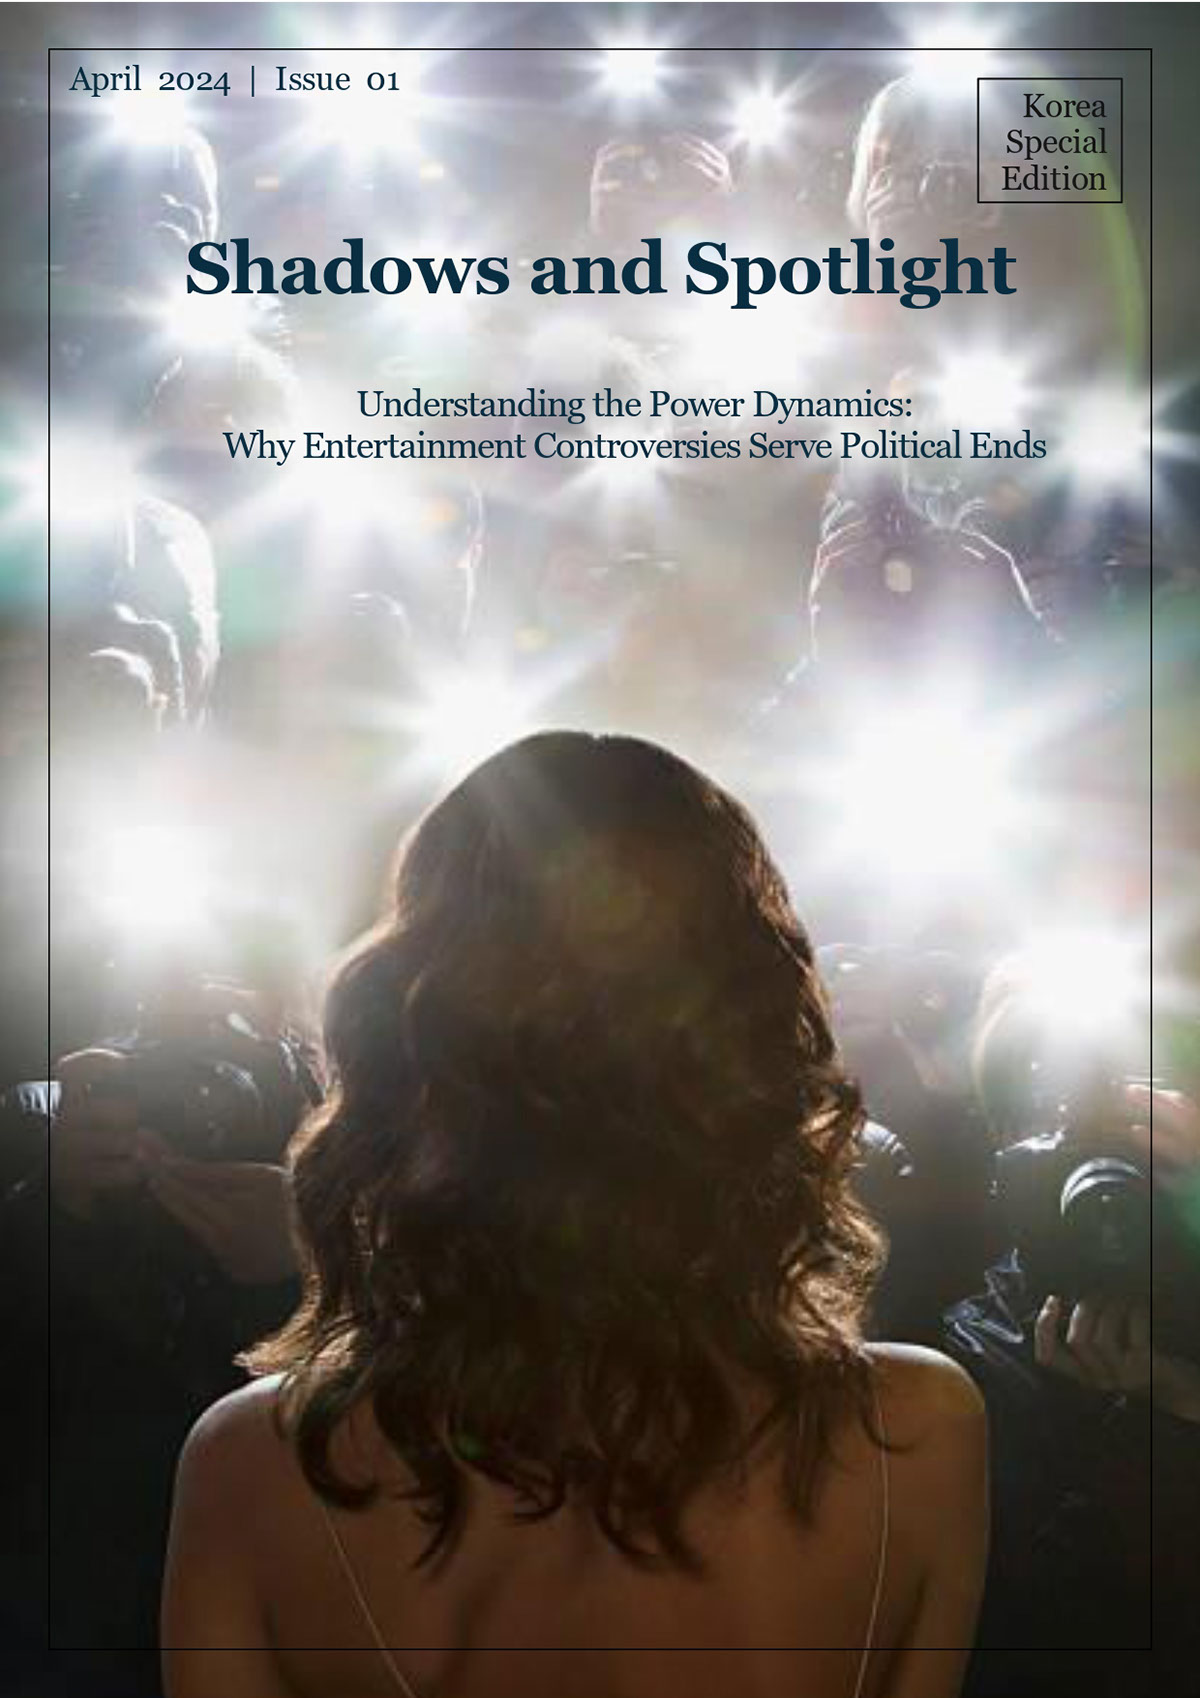 Shadows and Spotlight rendition image